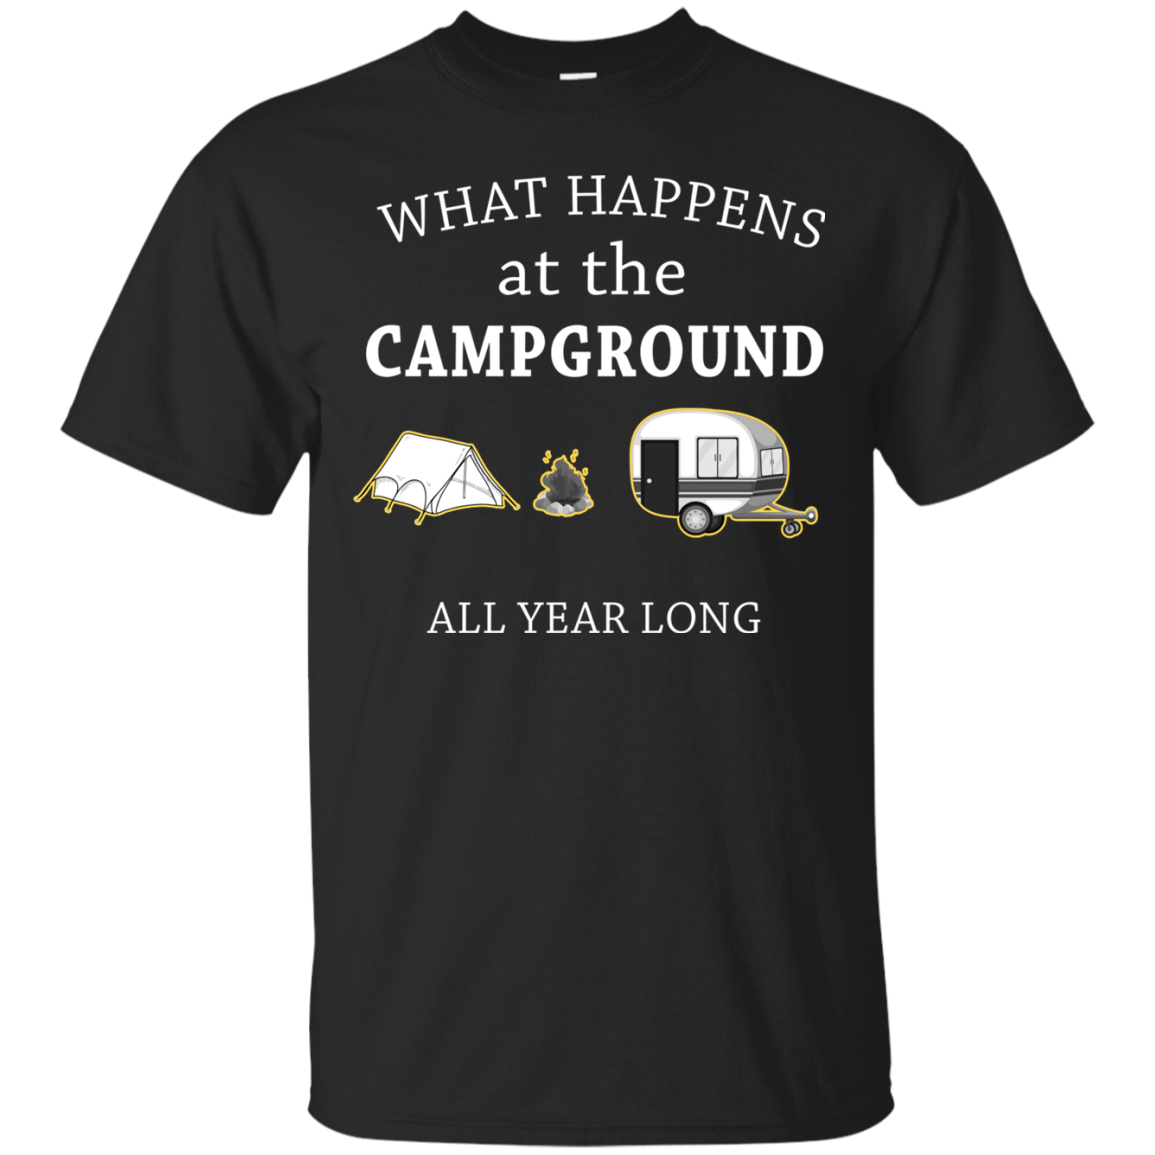 What happens at the Campground all year long shirt, tank, hoodie